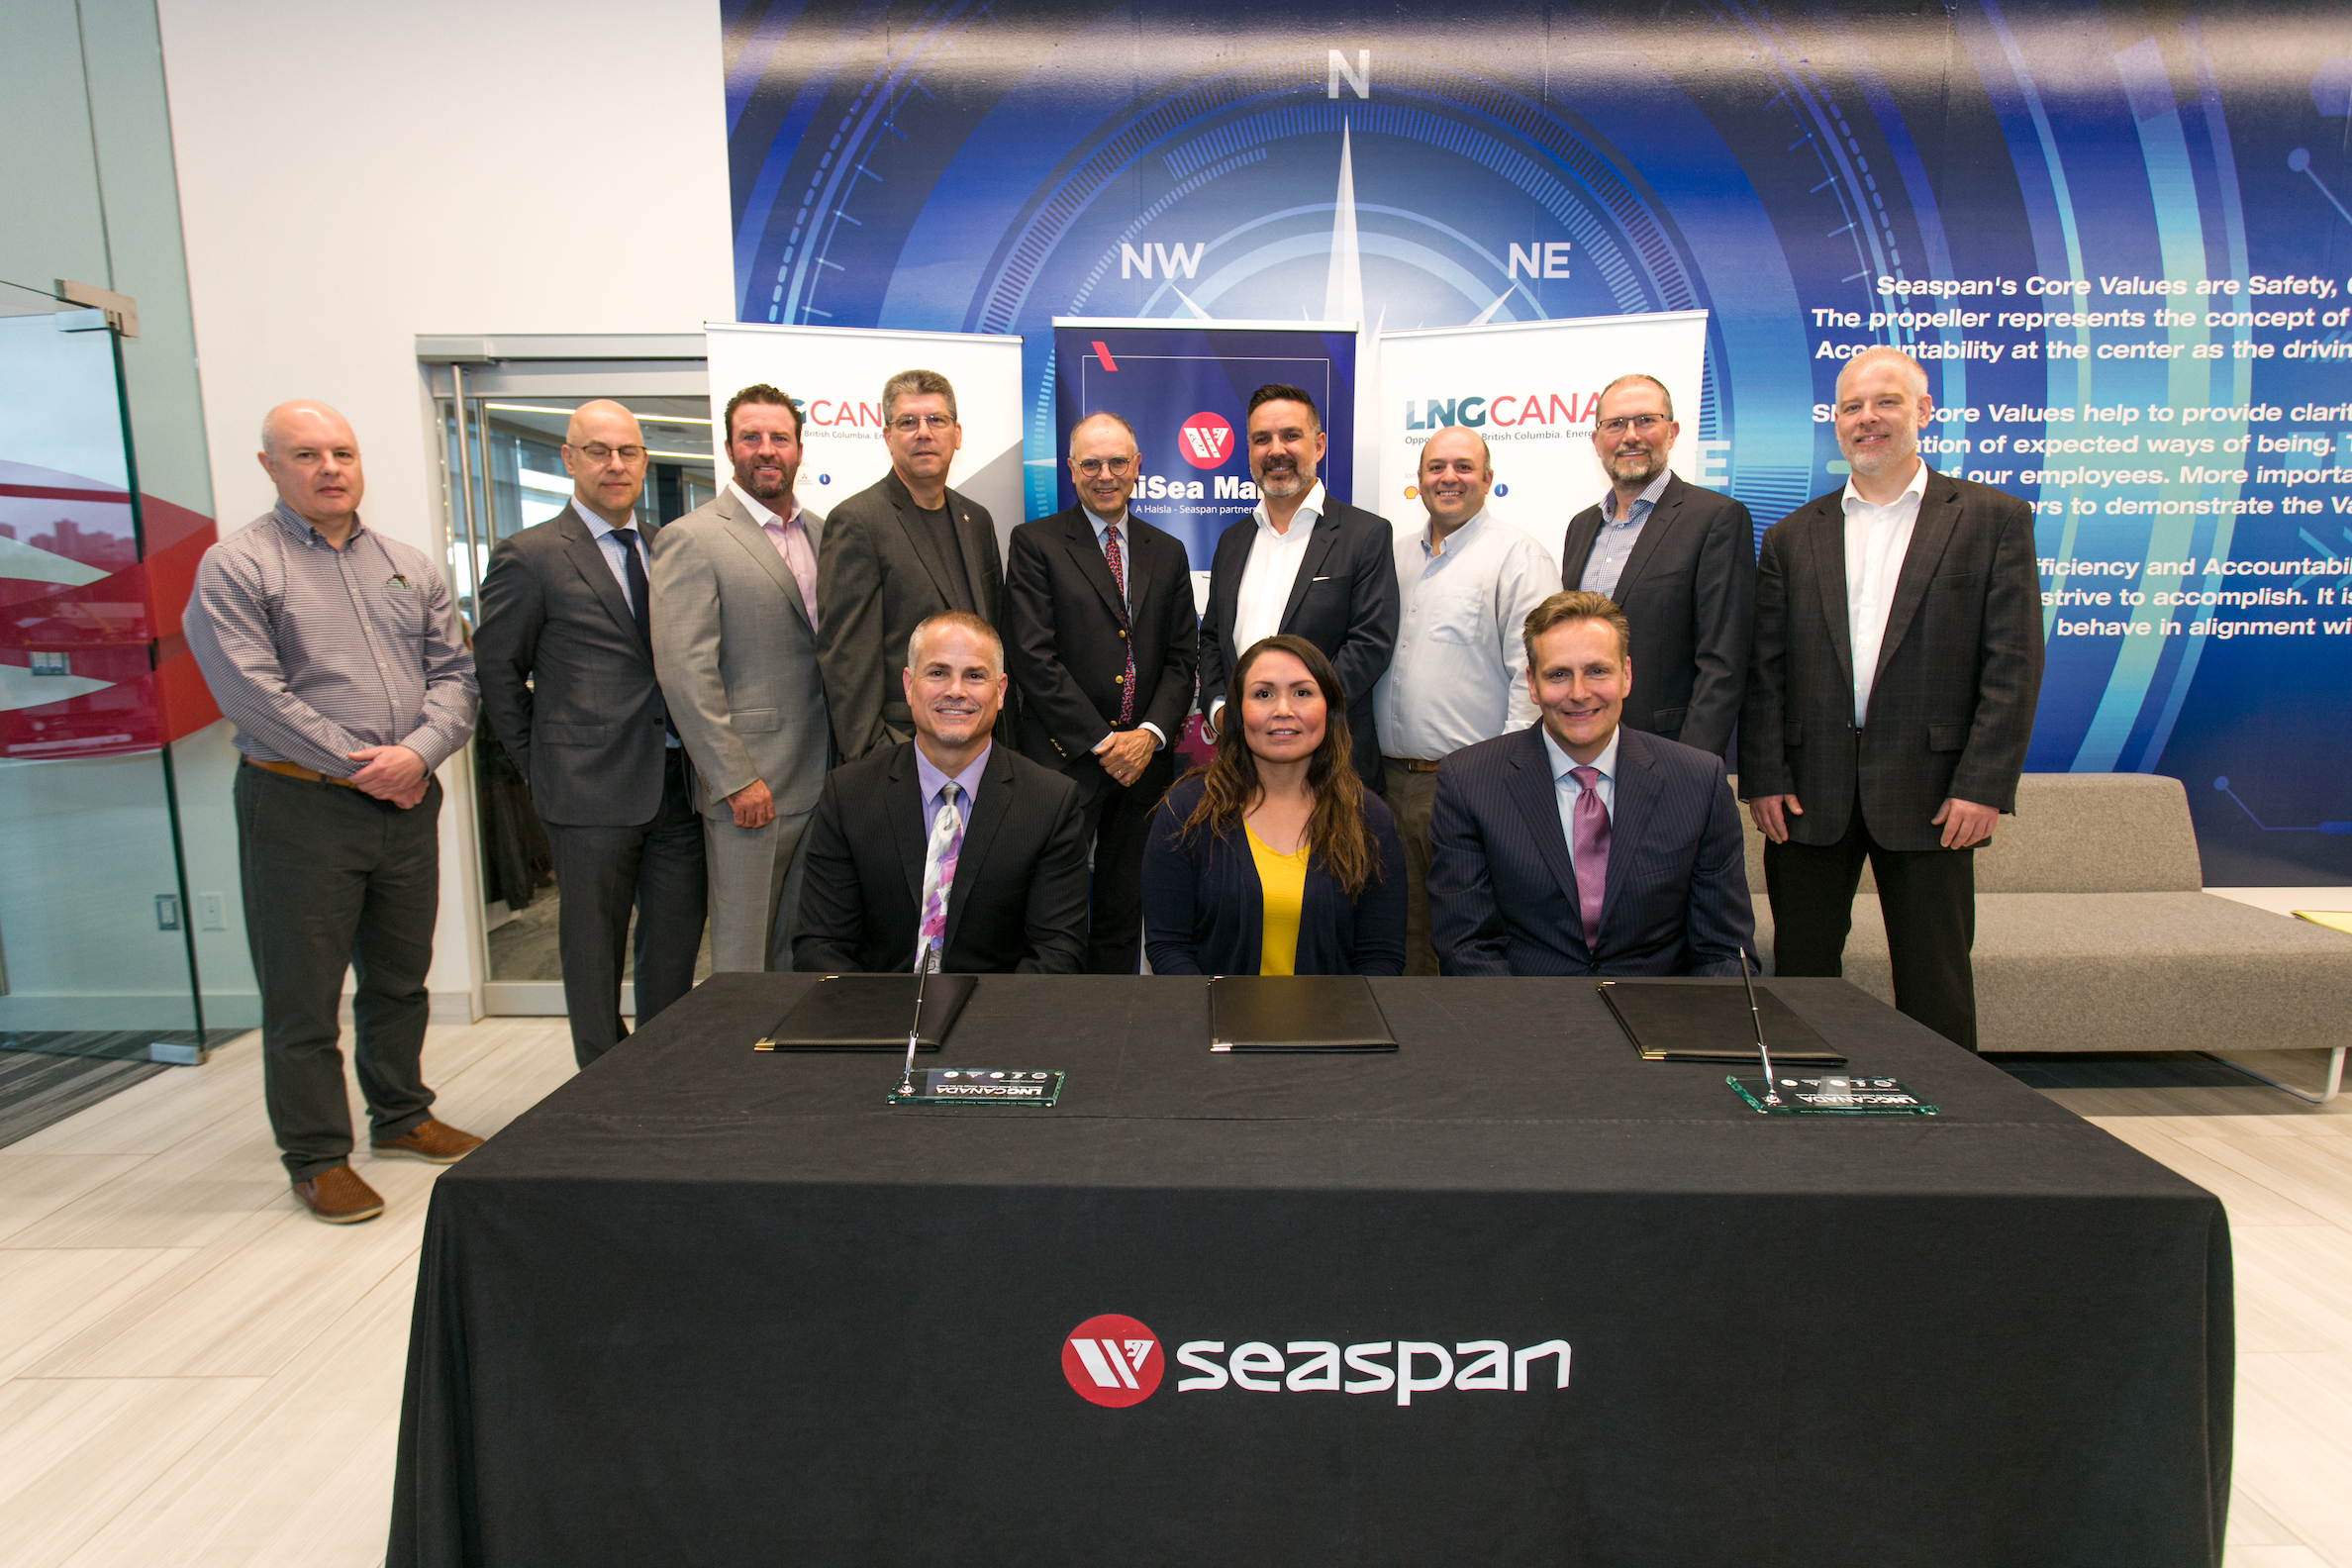 Front row L to R: Bart Reynolds, President Seaspan Marine, Crystal Smith, Chief Councillor Haisla Nation, Frank Butzelaar, CEO Seaspan Marine Transportation – Back row: Representatives from Seaspan, the Haisla Nation and union leadership witnessed the signing of the agreement.